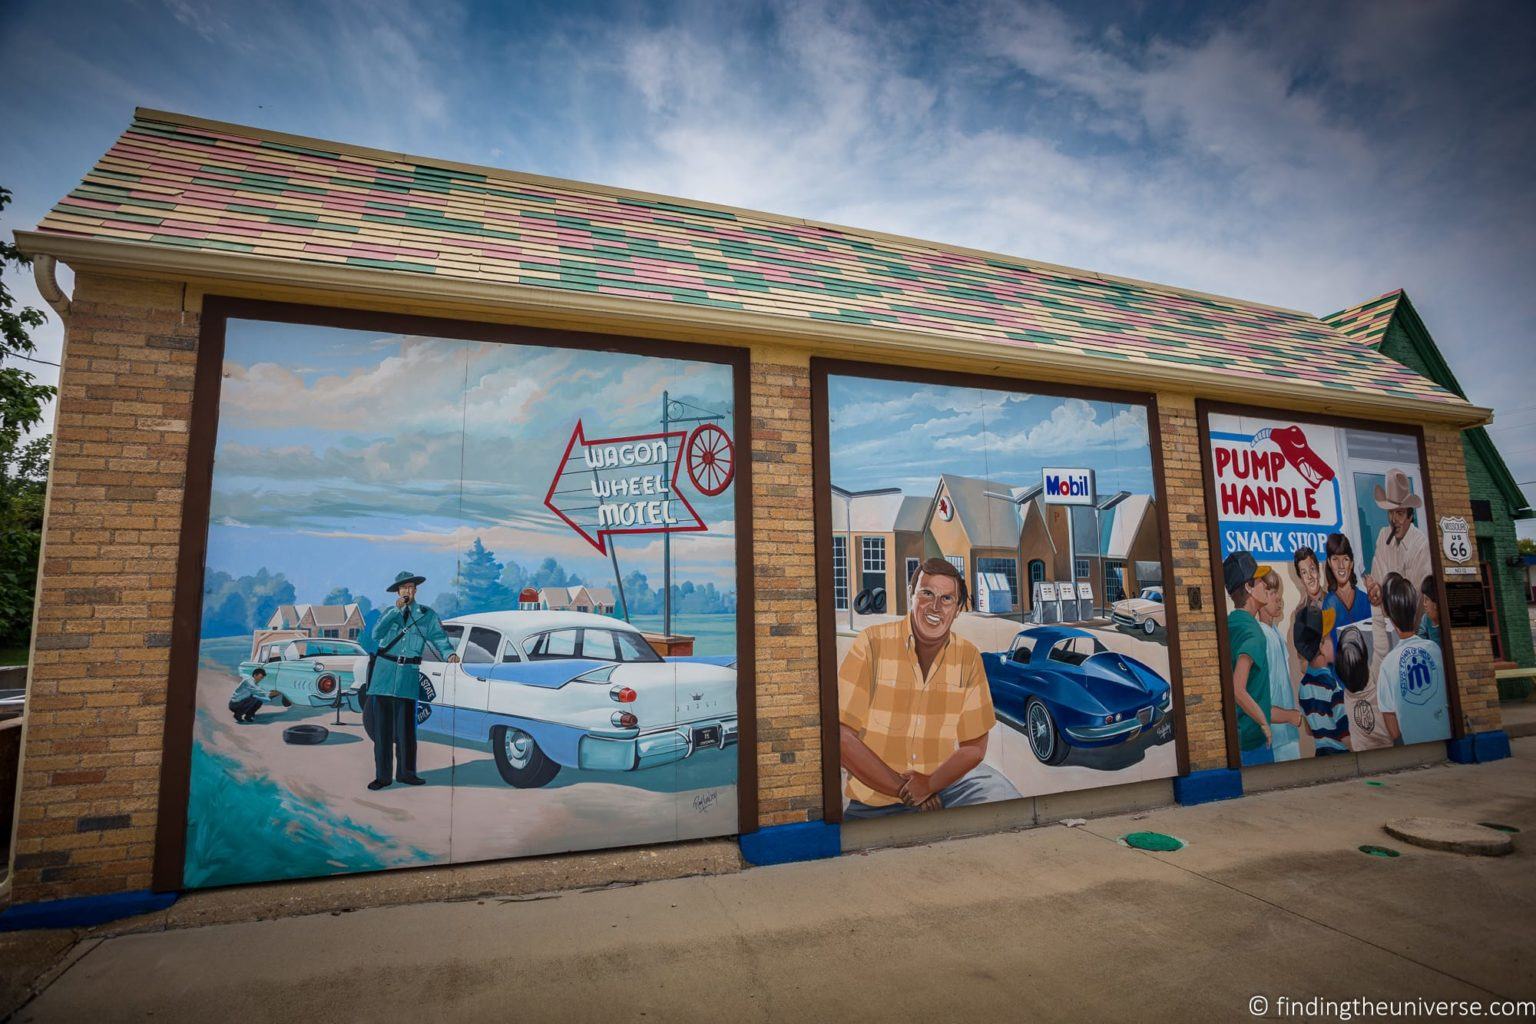 Route 66 in Missouri - All the highlights! - Finding the Universe